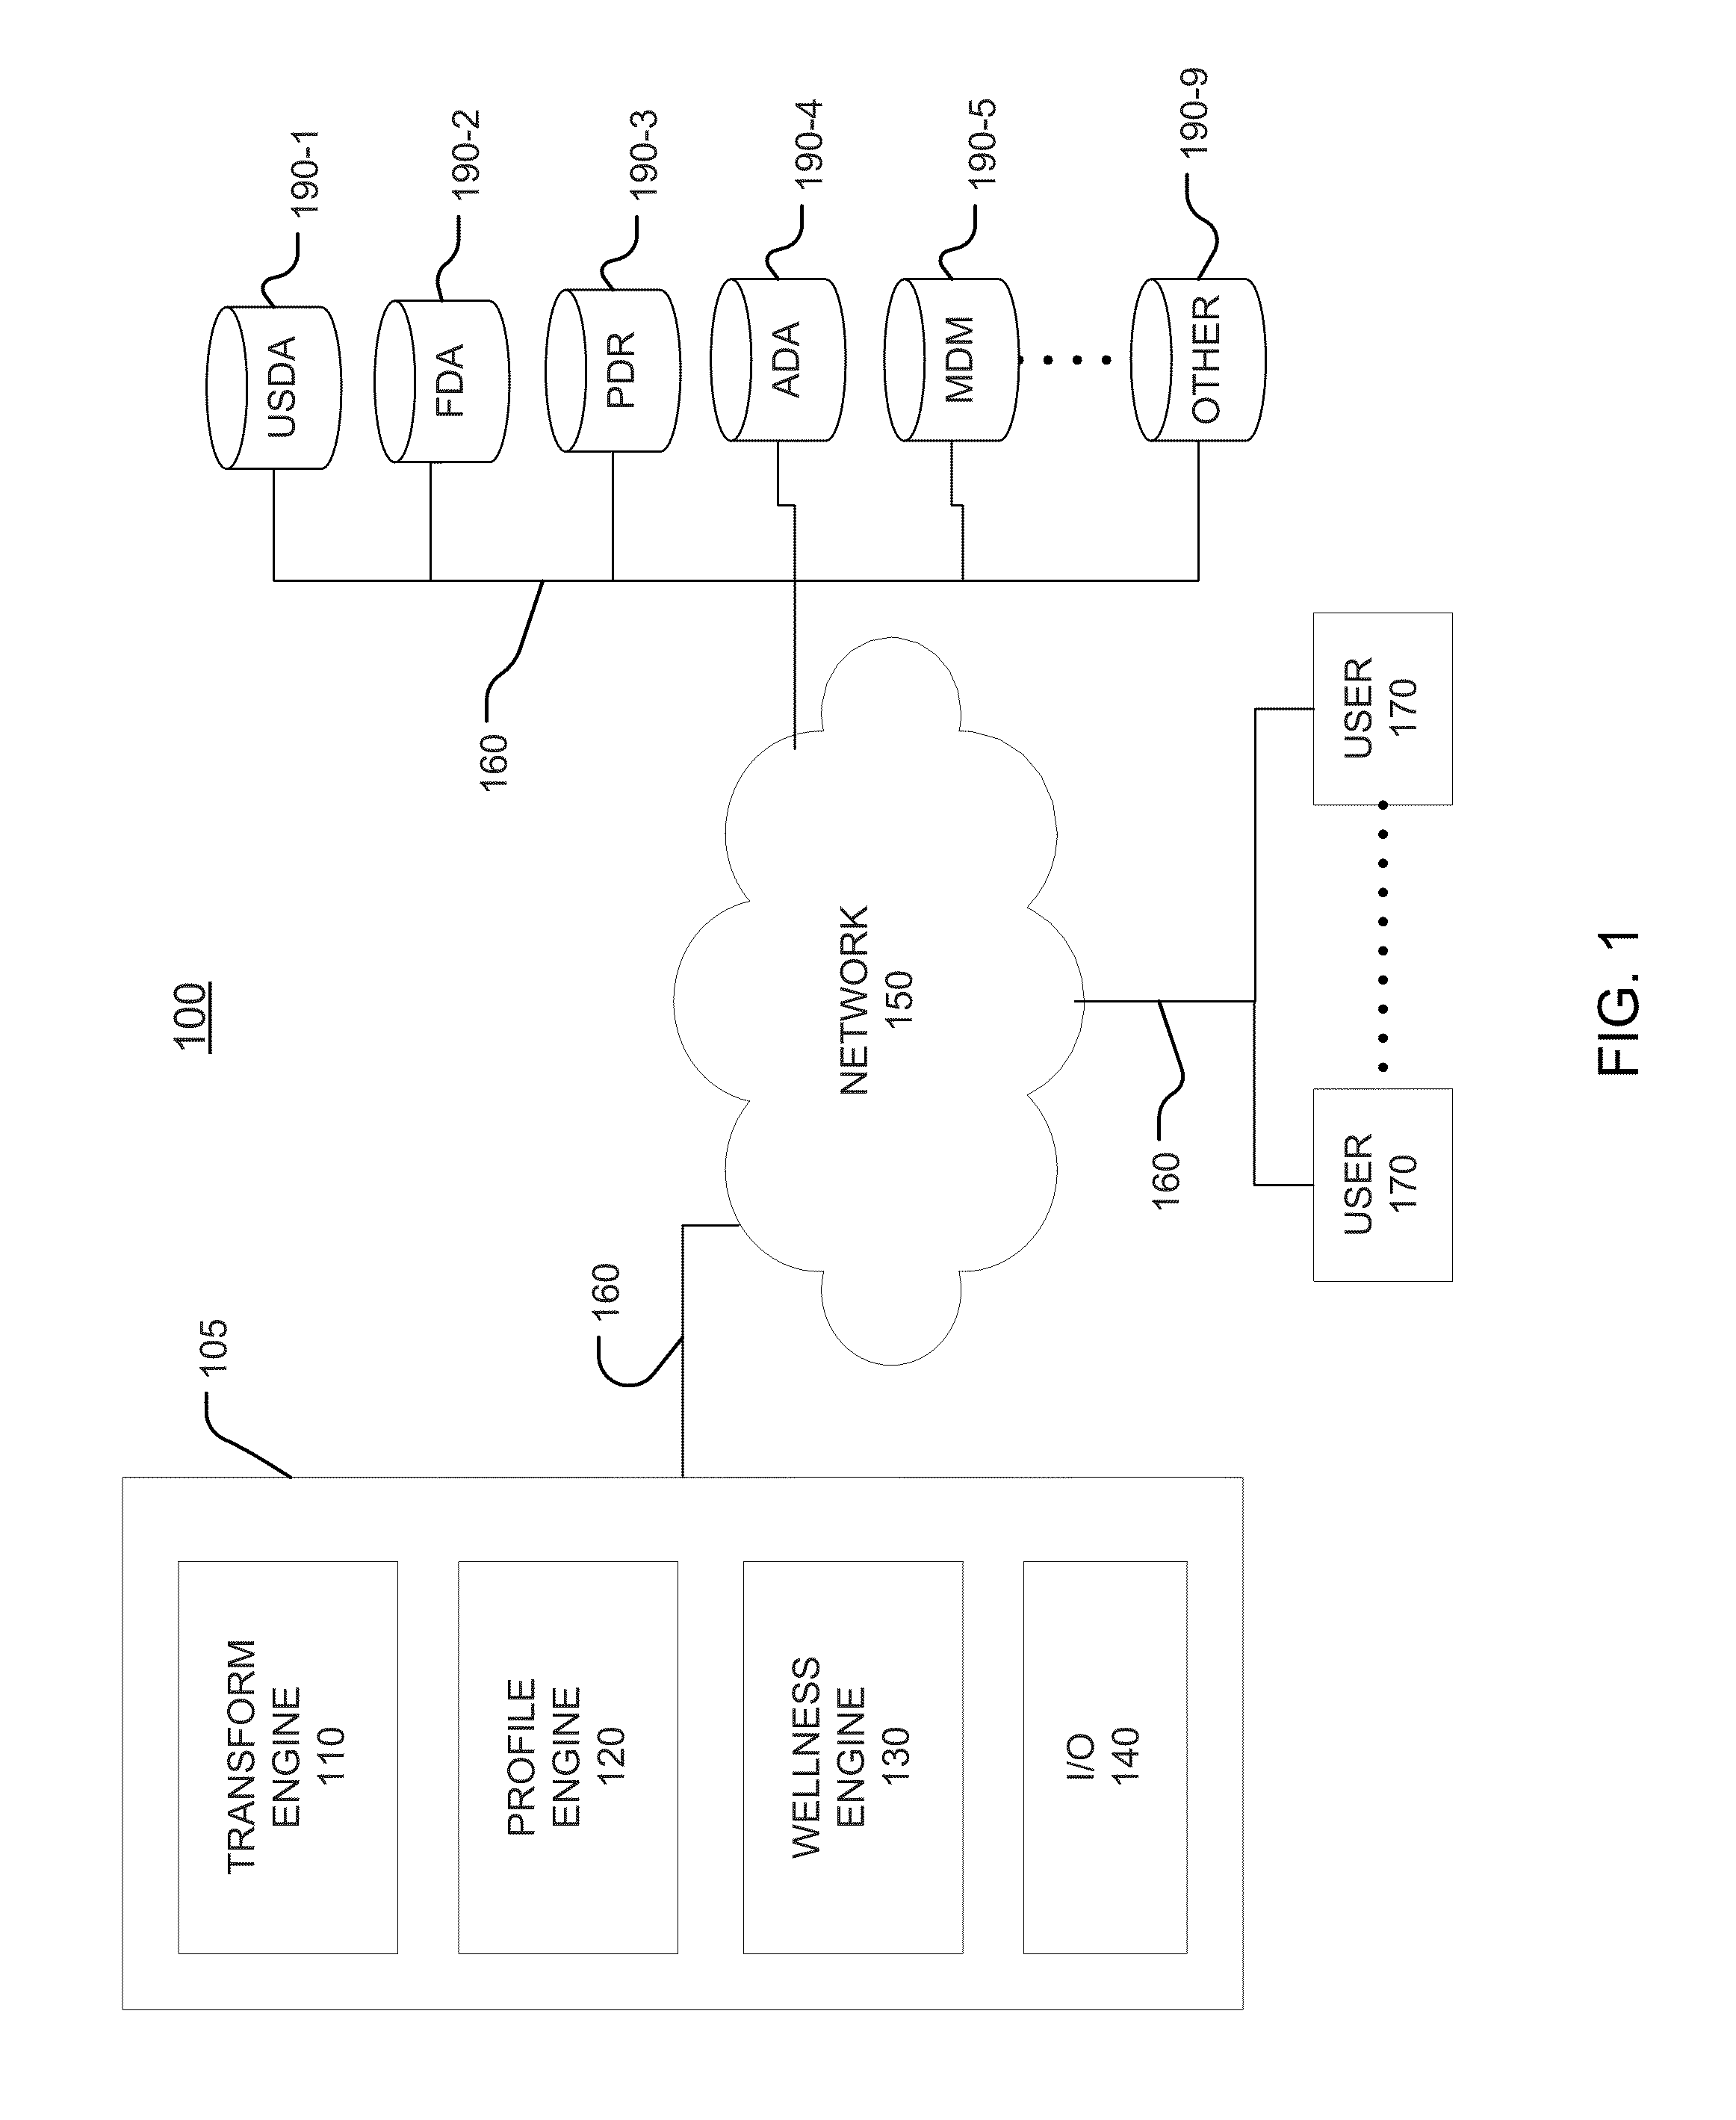 Personal wellbeing device and system